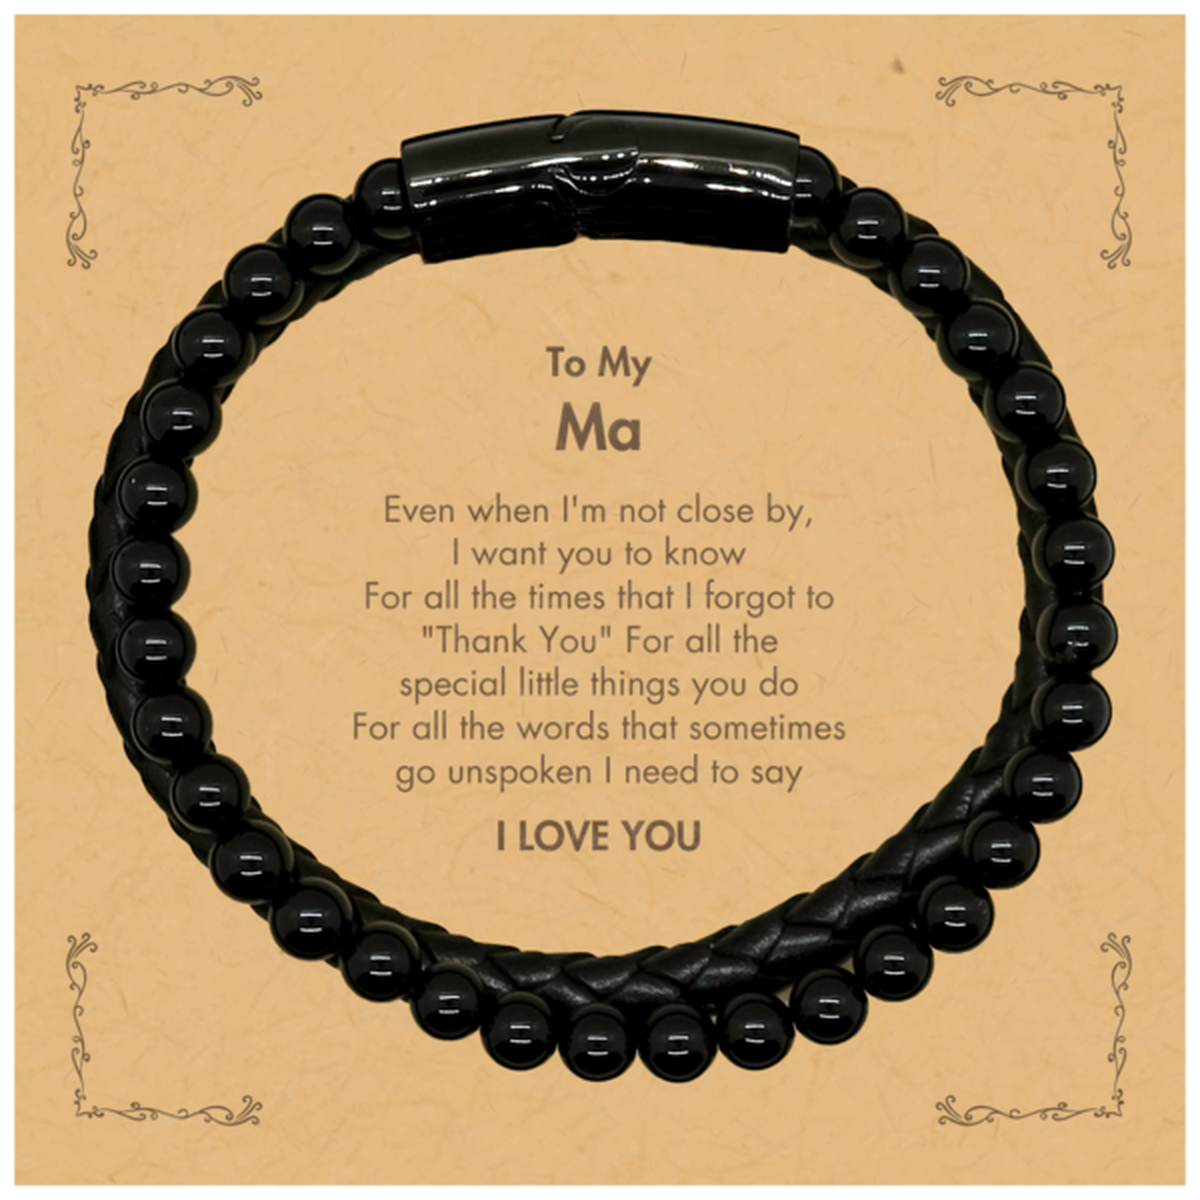 Thank You Gifts for Ma, Keepsake Stone Leather Bracelets Gifts for Ma Birthday Mother's day Father's Day Ma For all the words That sometimes go unspoken I need to say I LOVE YOU